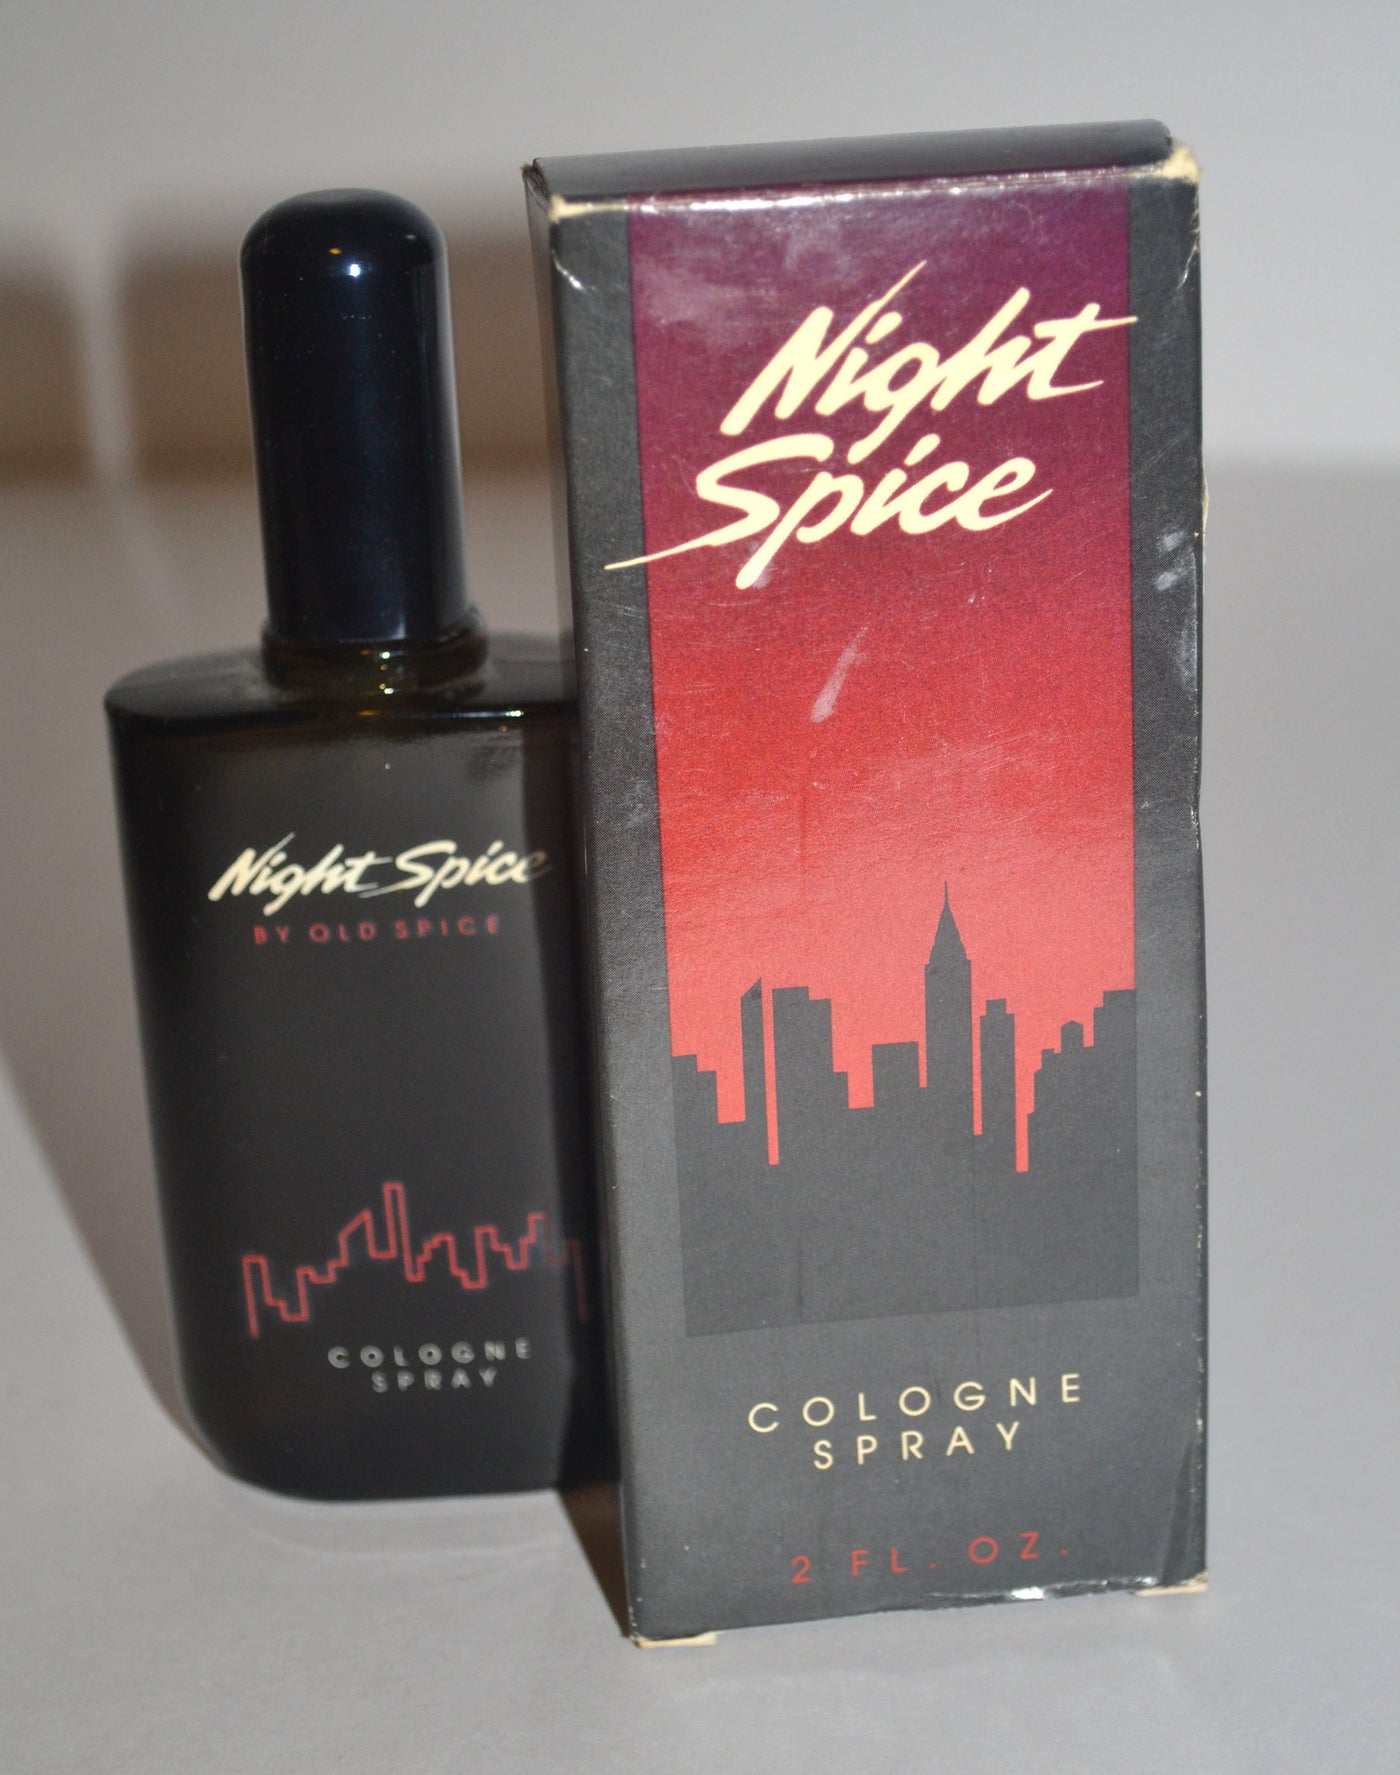 Night Spice Old Spice Cologne By Shulton 